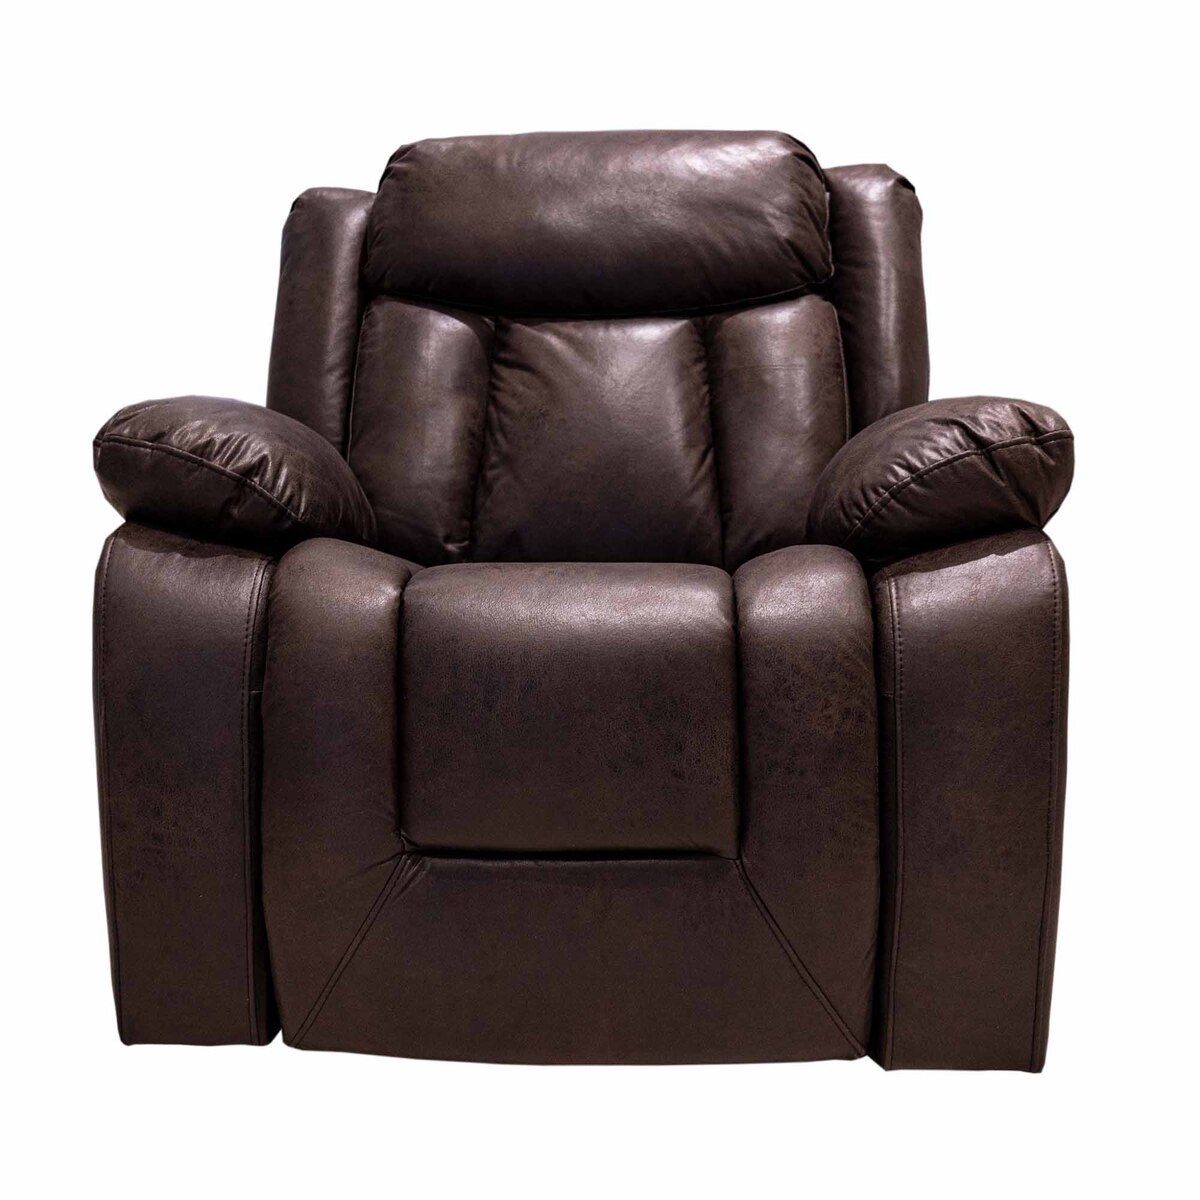 Maple Leaf  Recliner Chair Choco 11959R Size:Cms 100x170x100 Cms(HxWxL) (Made In China)